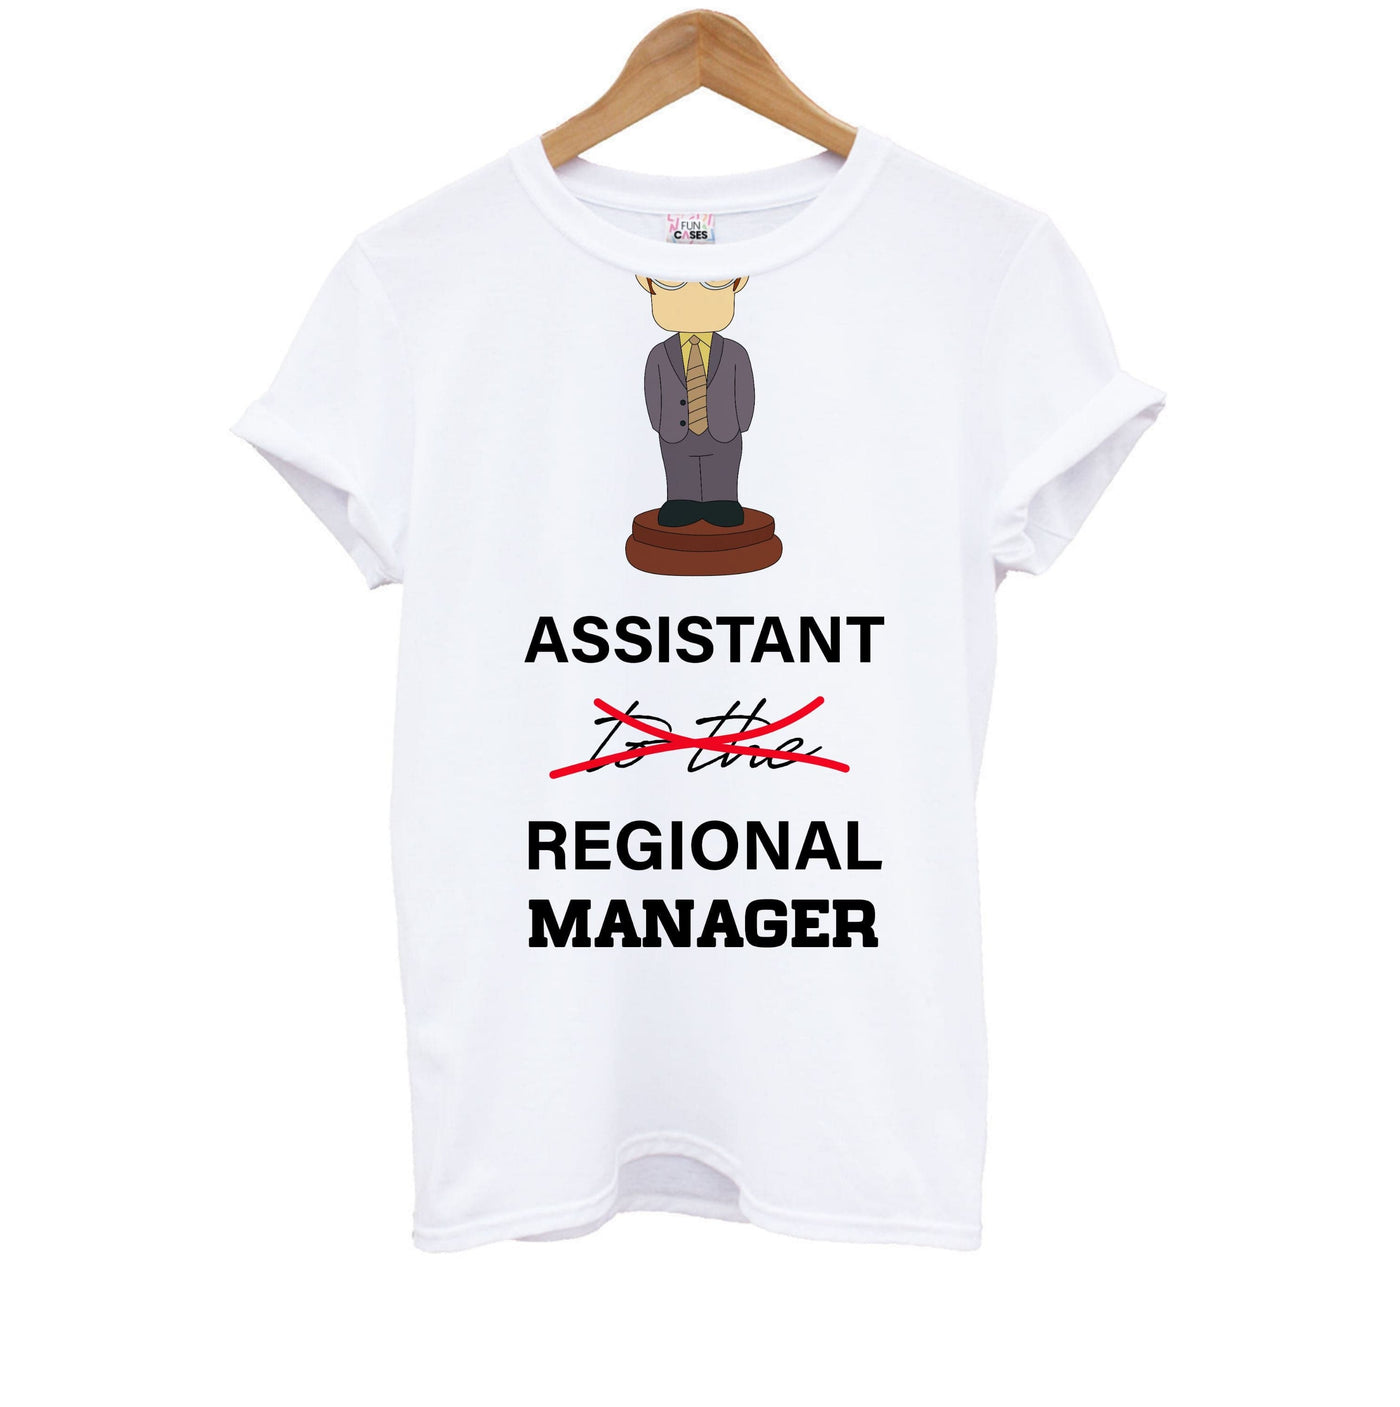 Assistant Regional Manager - The Office Kids T-Shirt